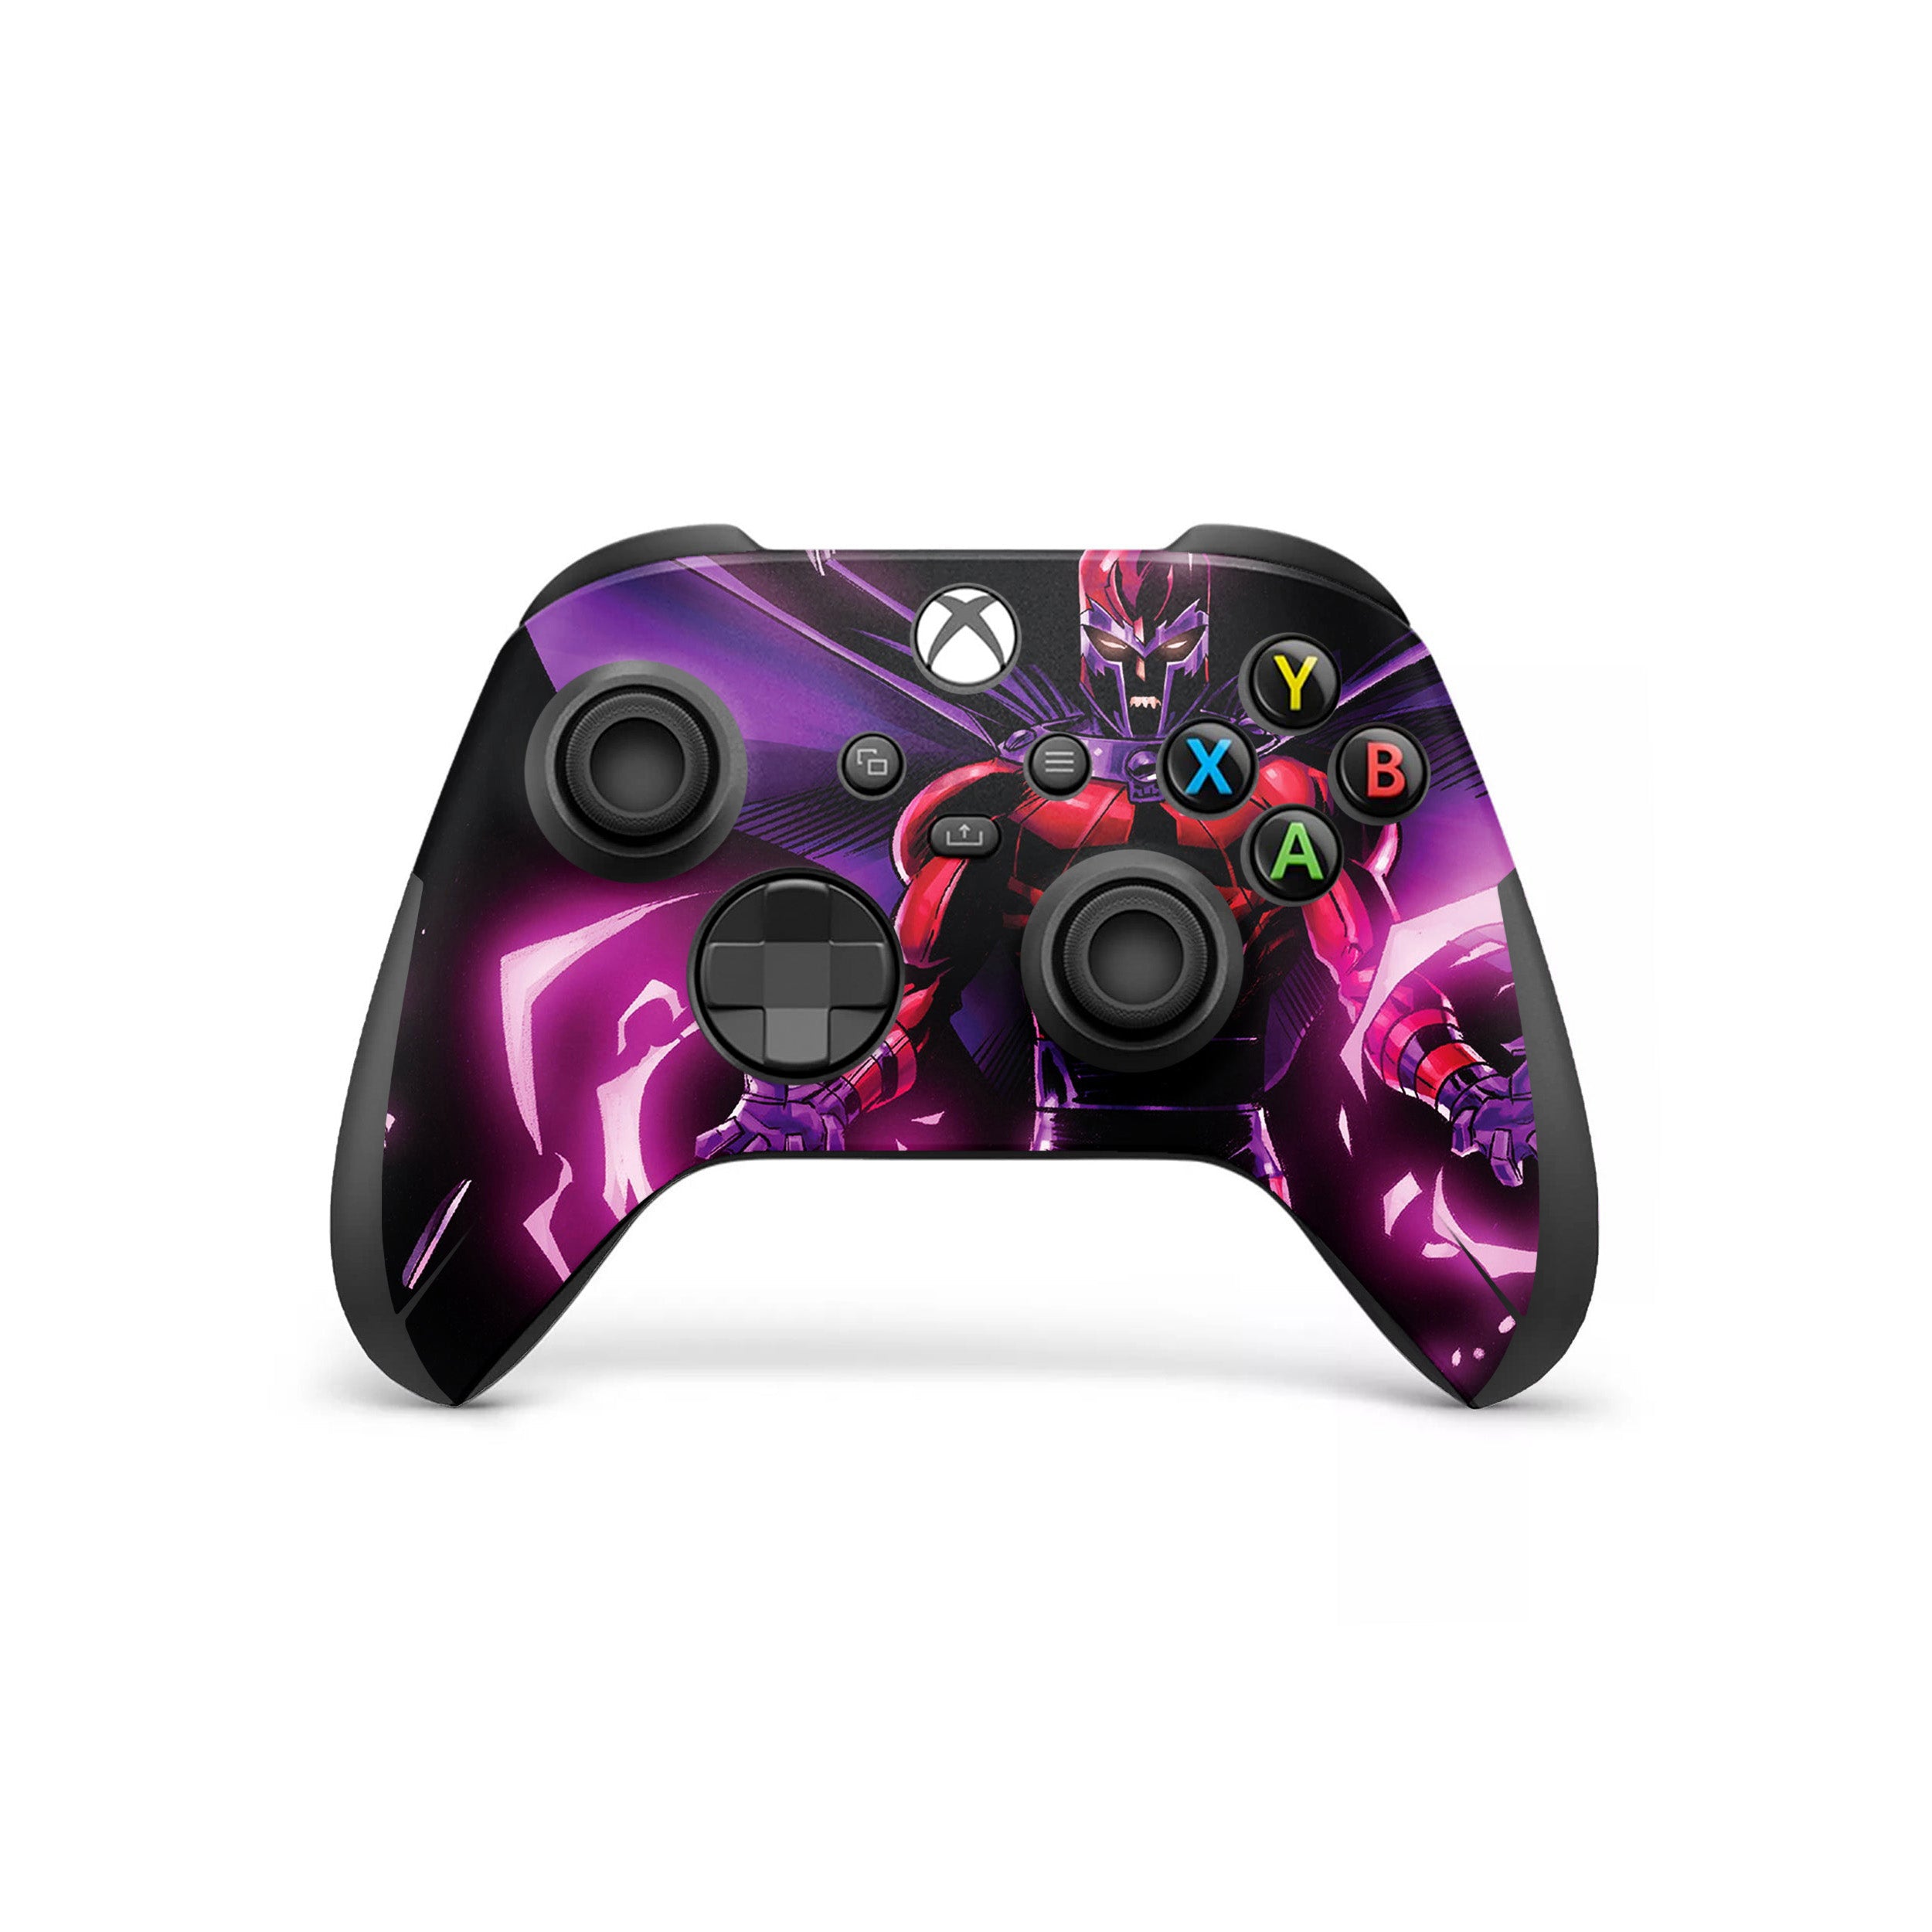 A video game skin featuring a Marvel Comics X Men Magneto design for the Xbox Wireless Controller.